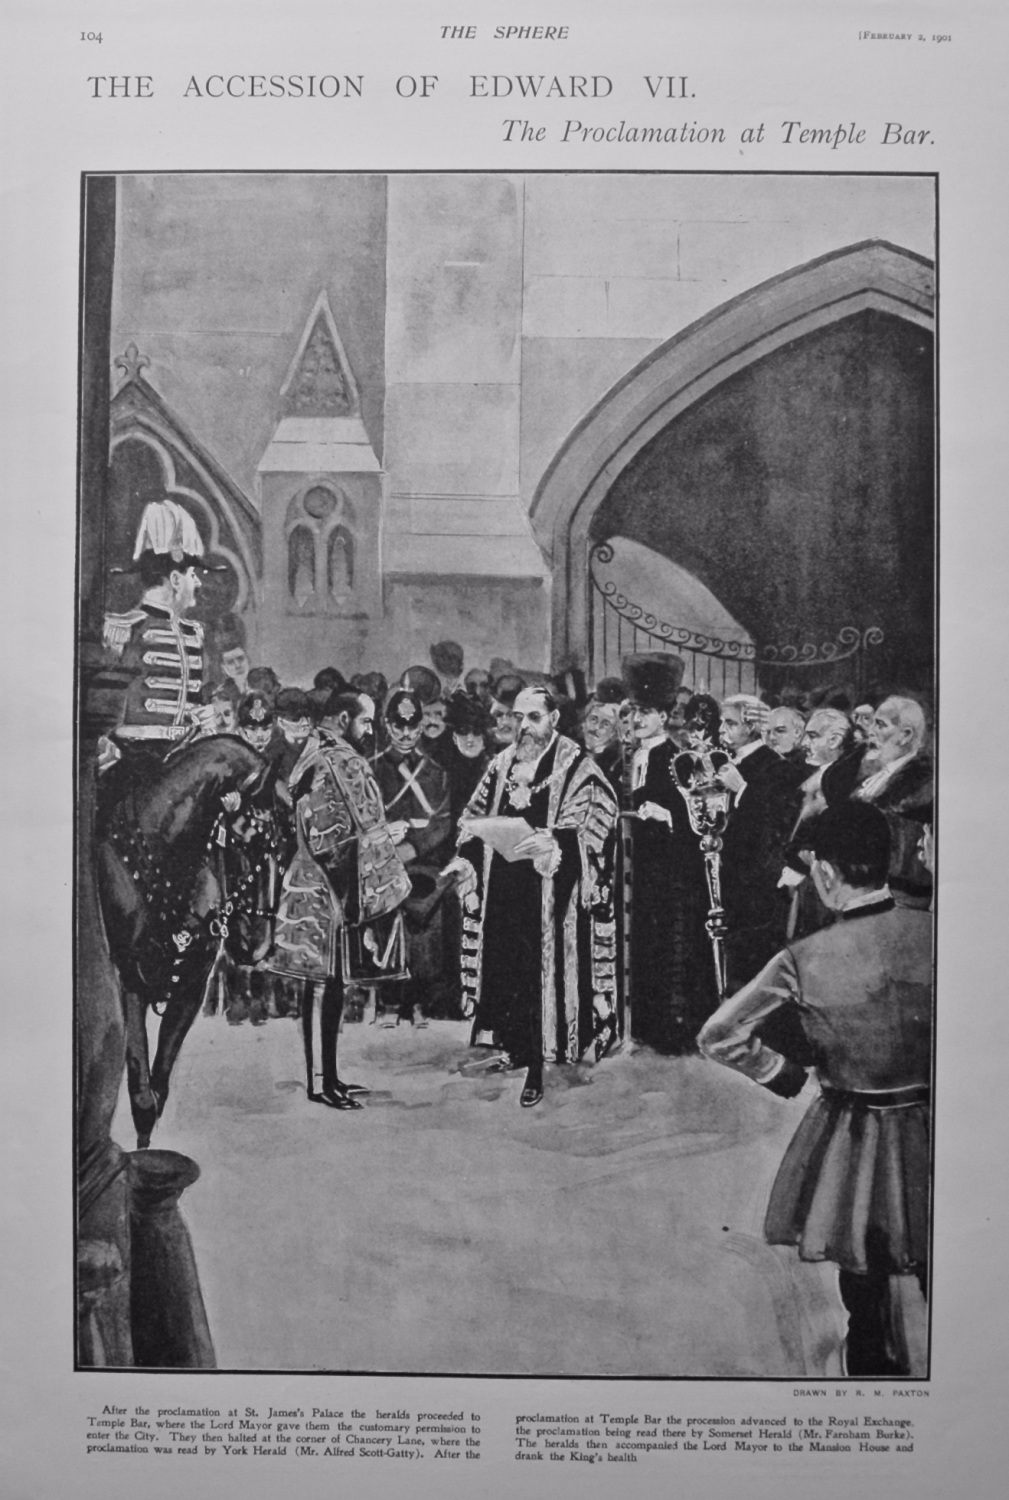 The Accession of Edward VII. The Proclamation at Temple Bar.  1901.